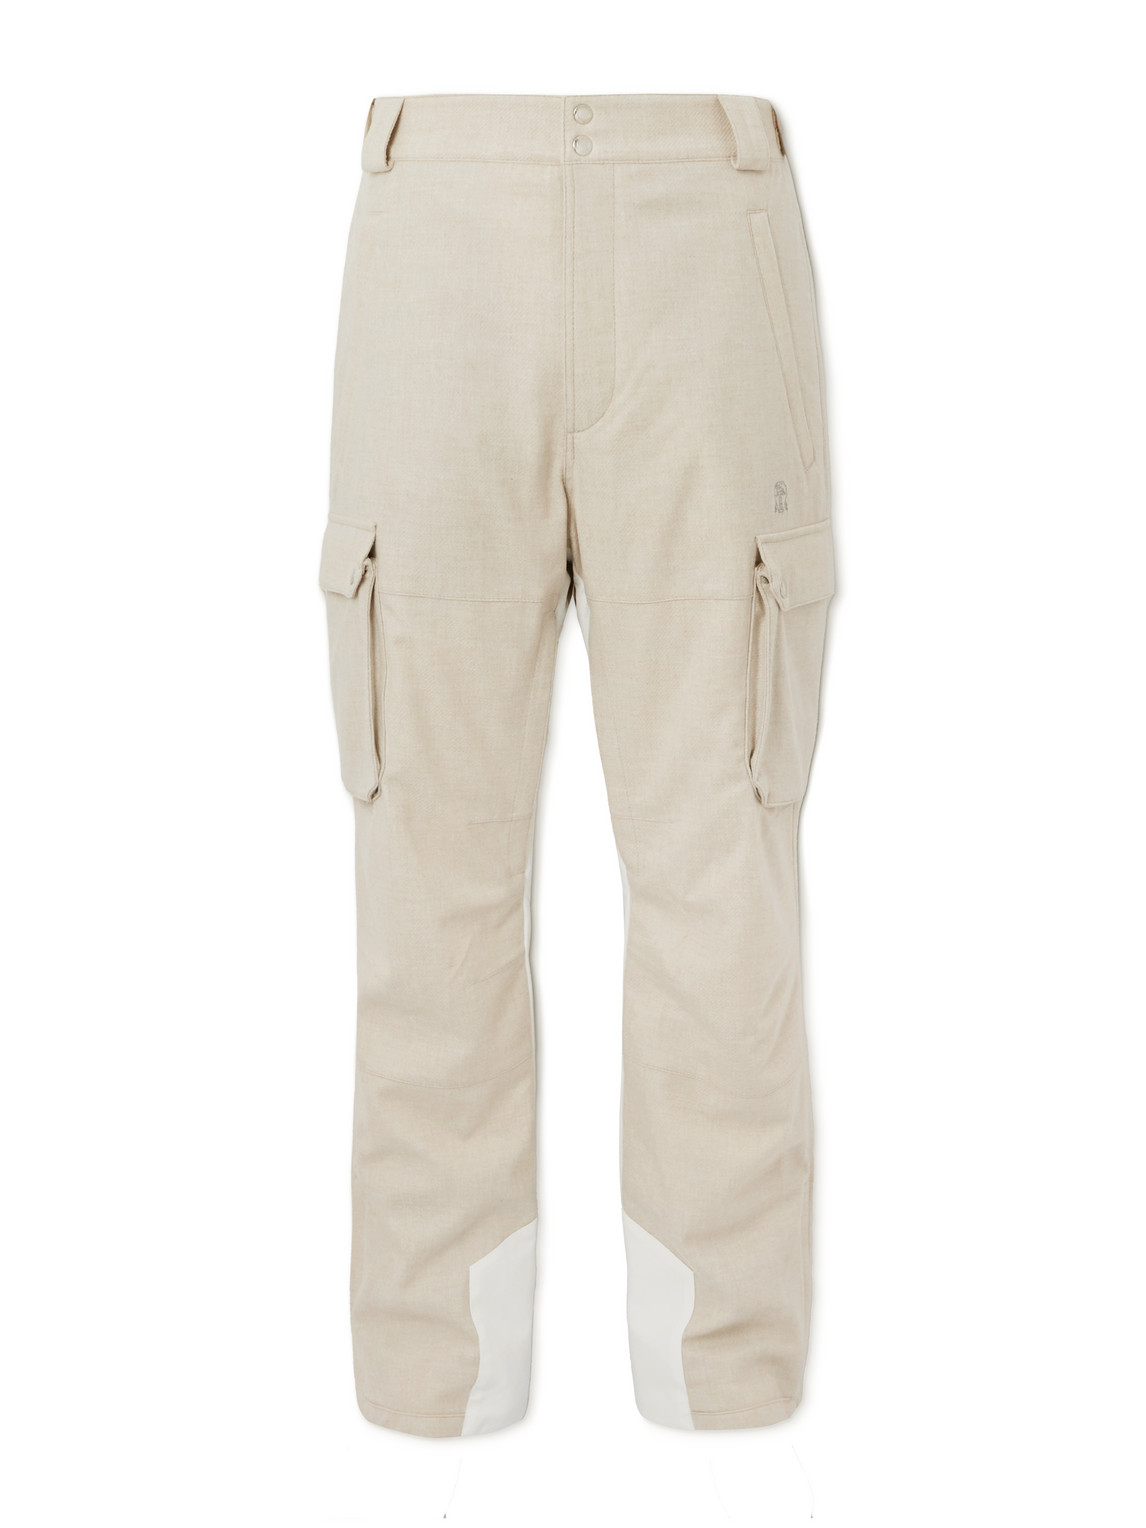 Brunello Cucinelli Shell-Trimmed Wool, Silk and Cashmere-Blend Ski Pants